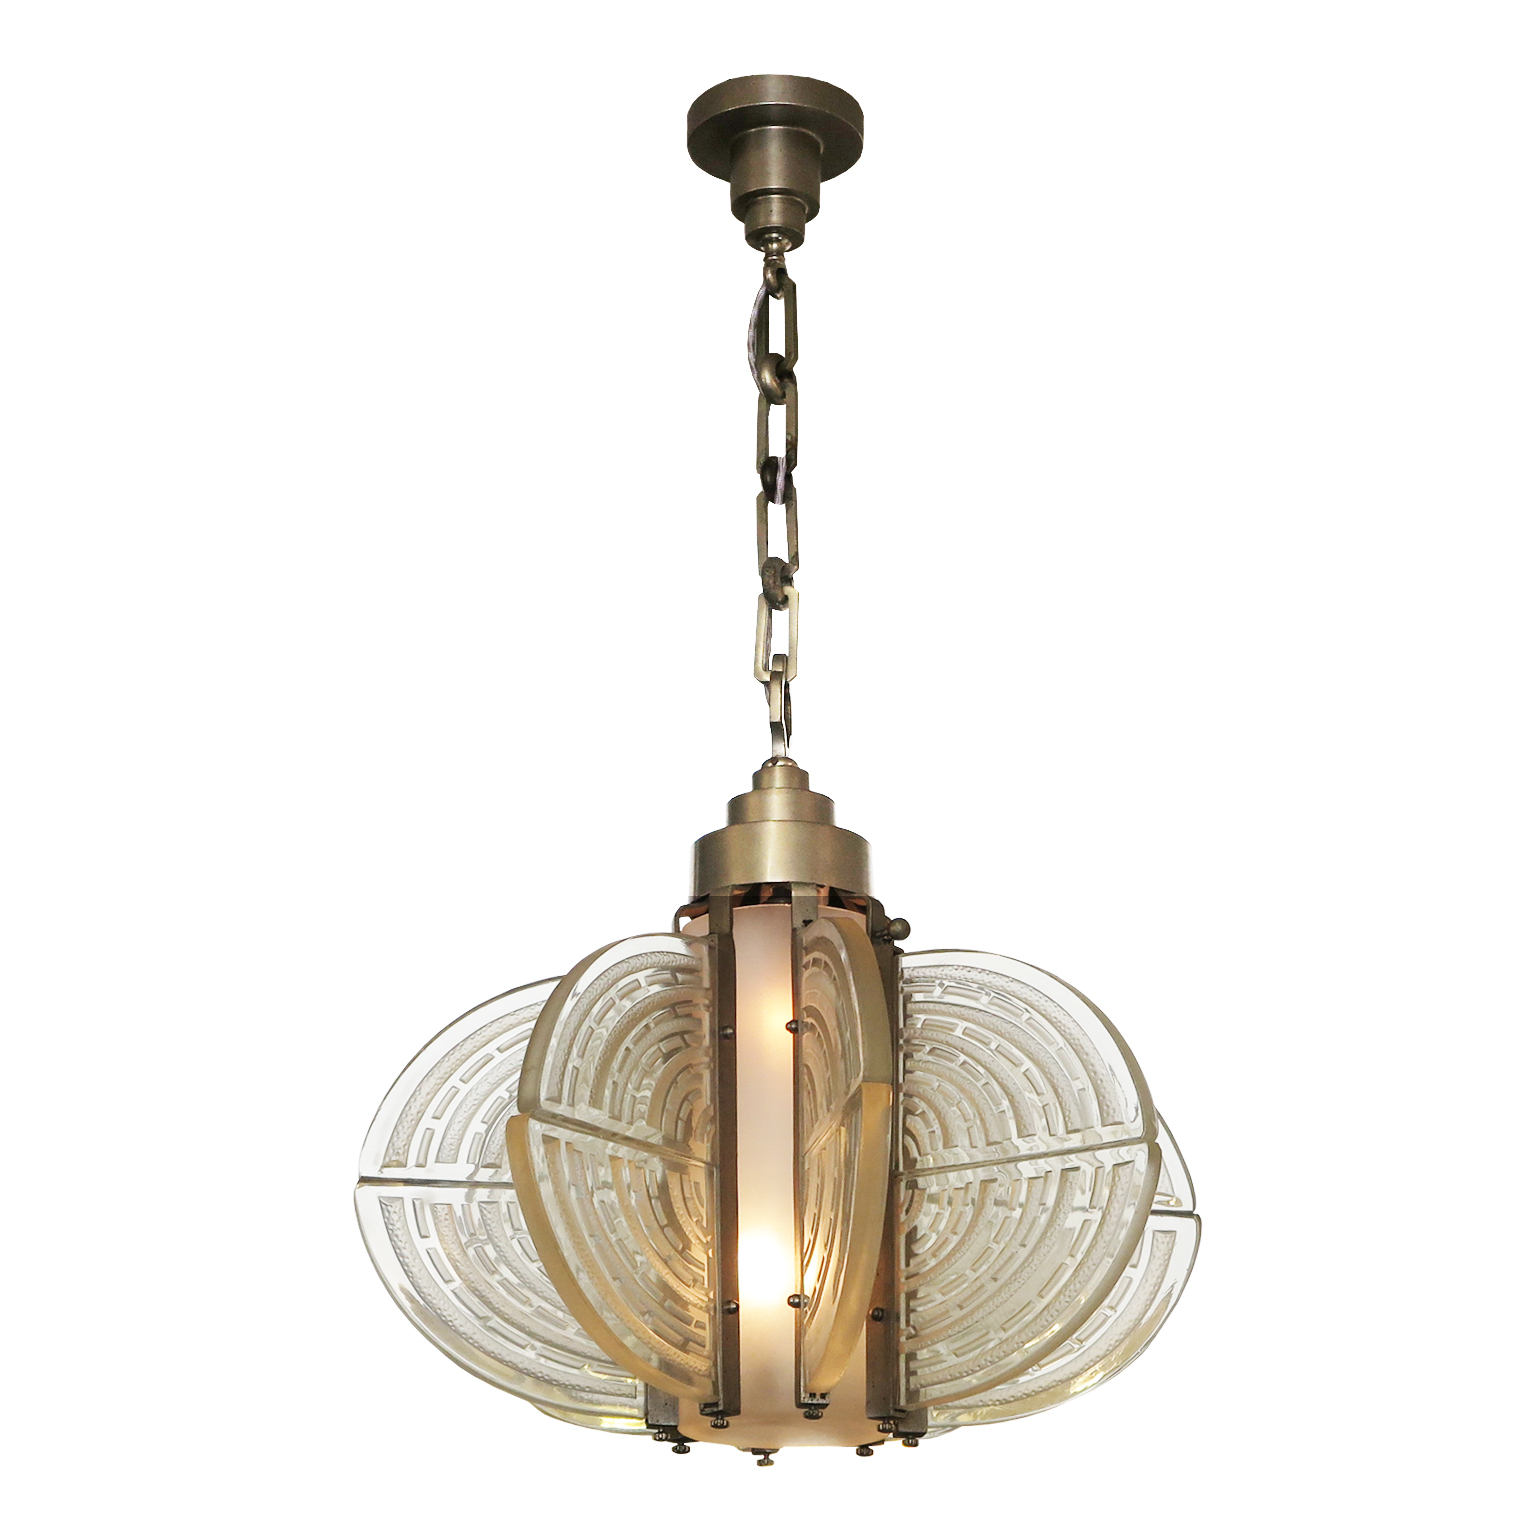 French Art Deco Chandelier with Deco style etched glass panels.